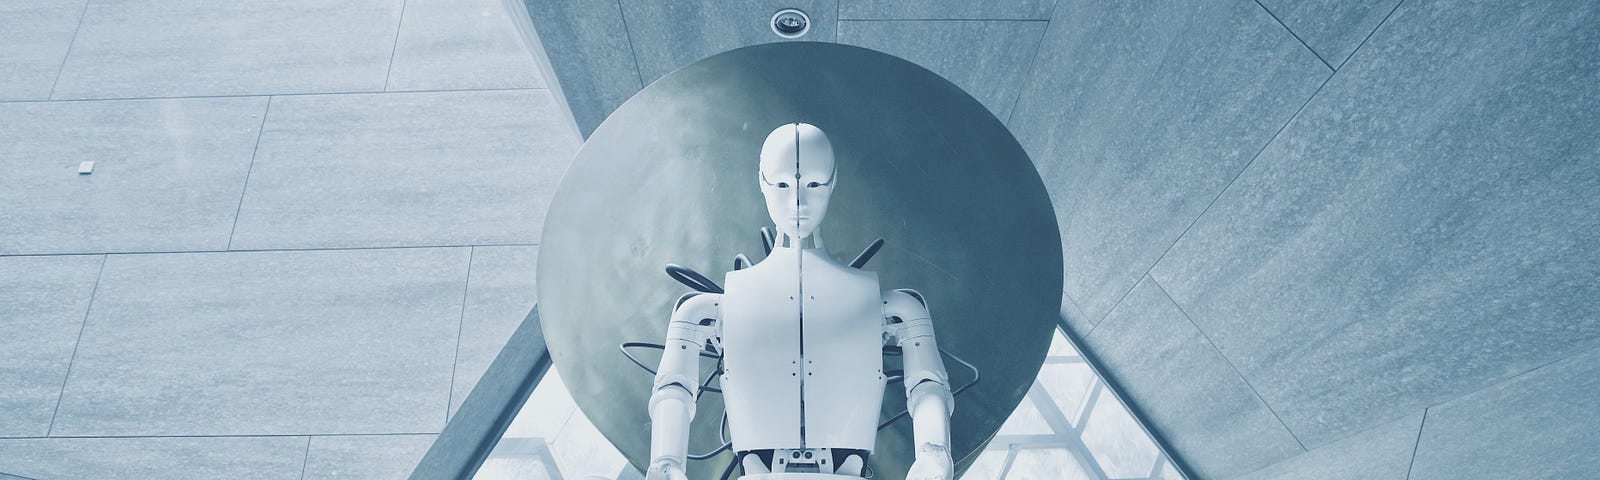 White android sitting cross-legged above wires against geometric background